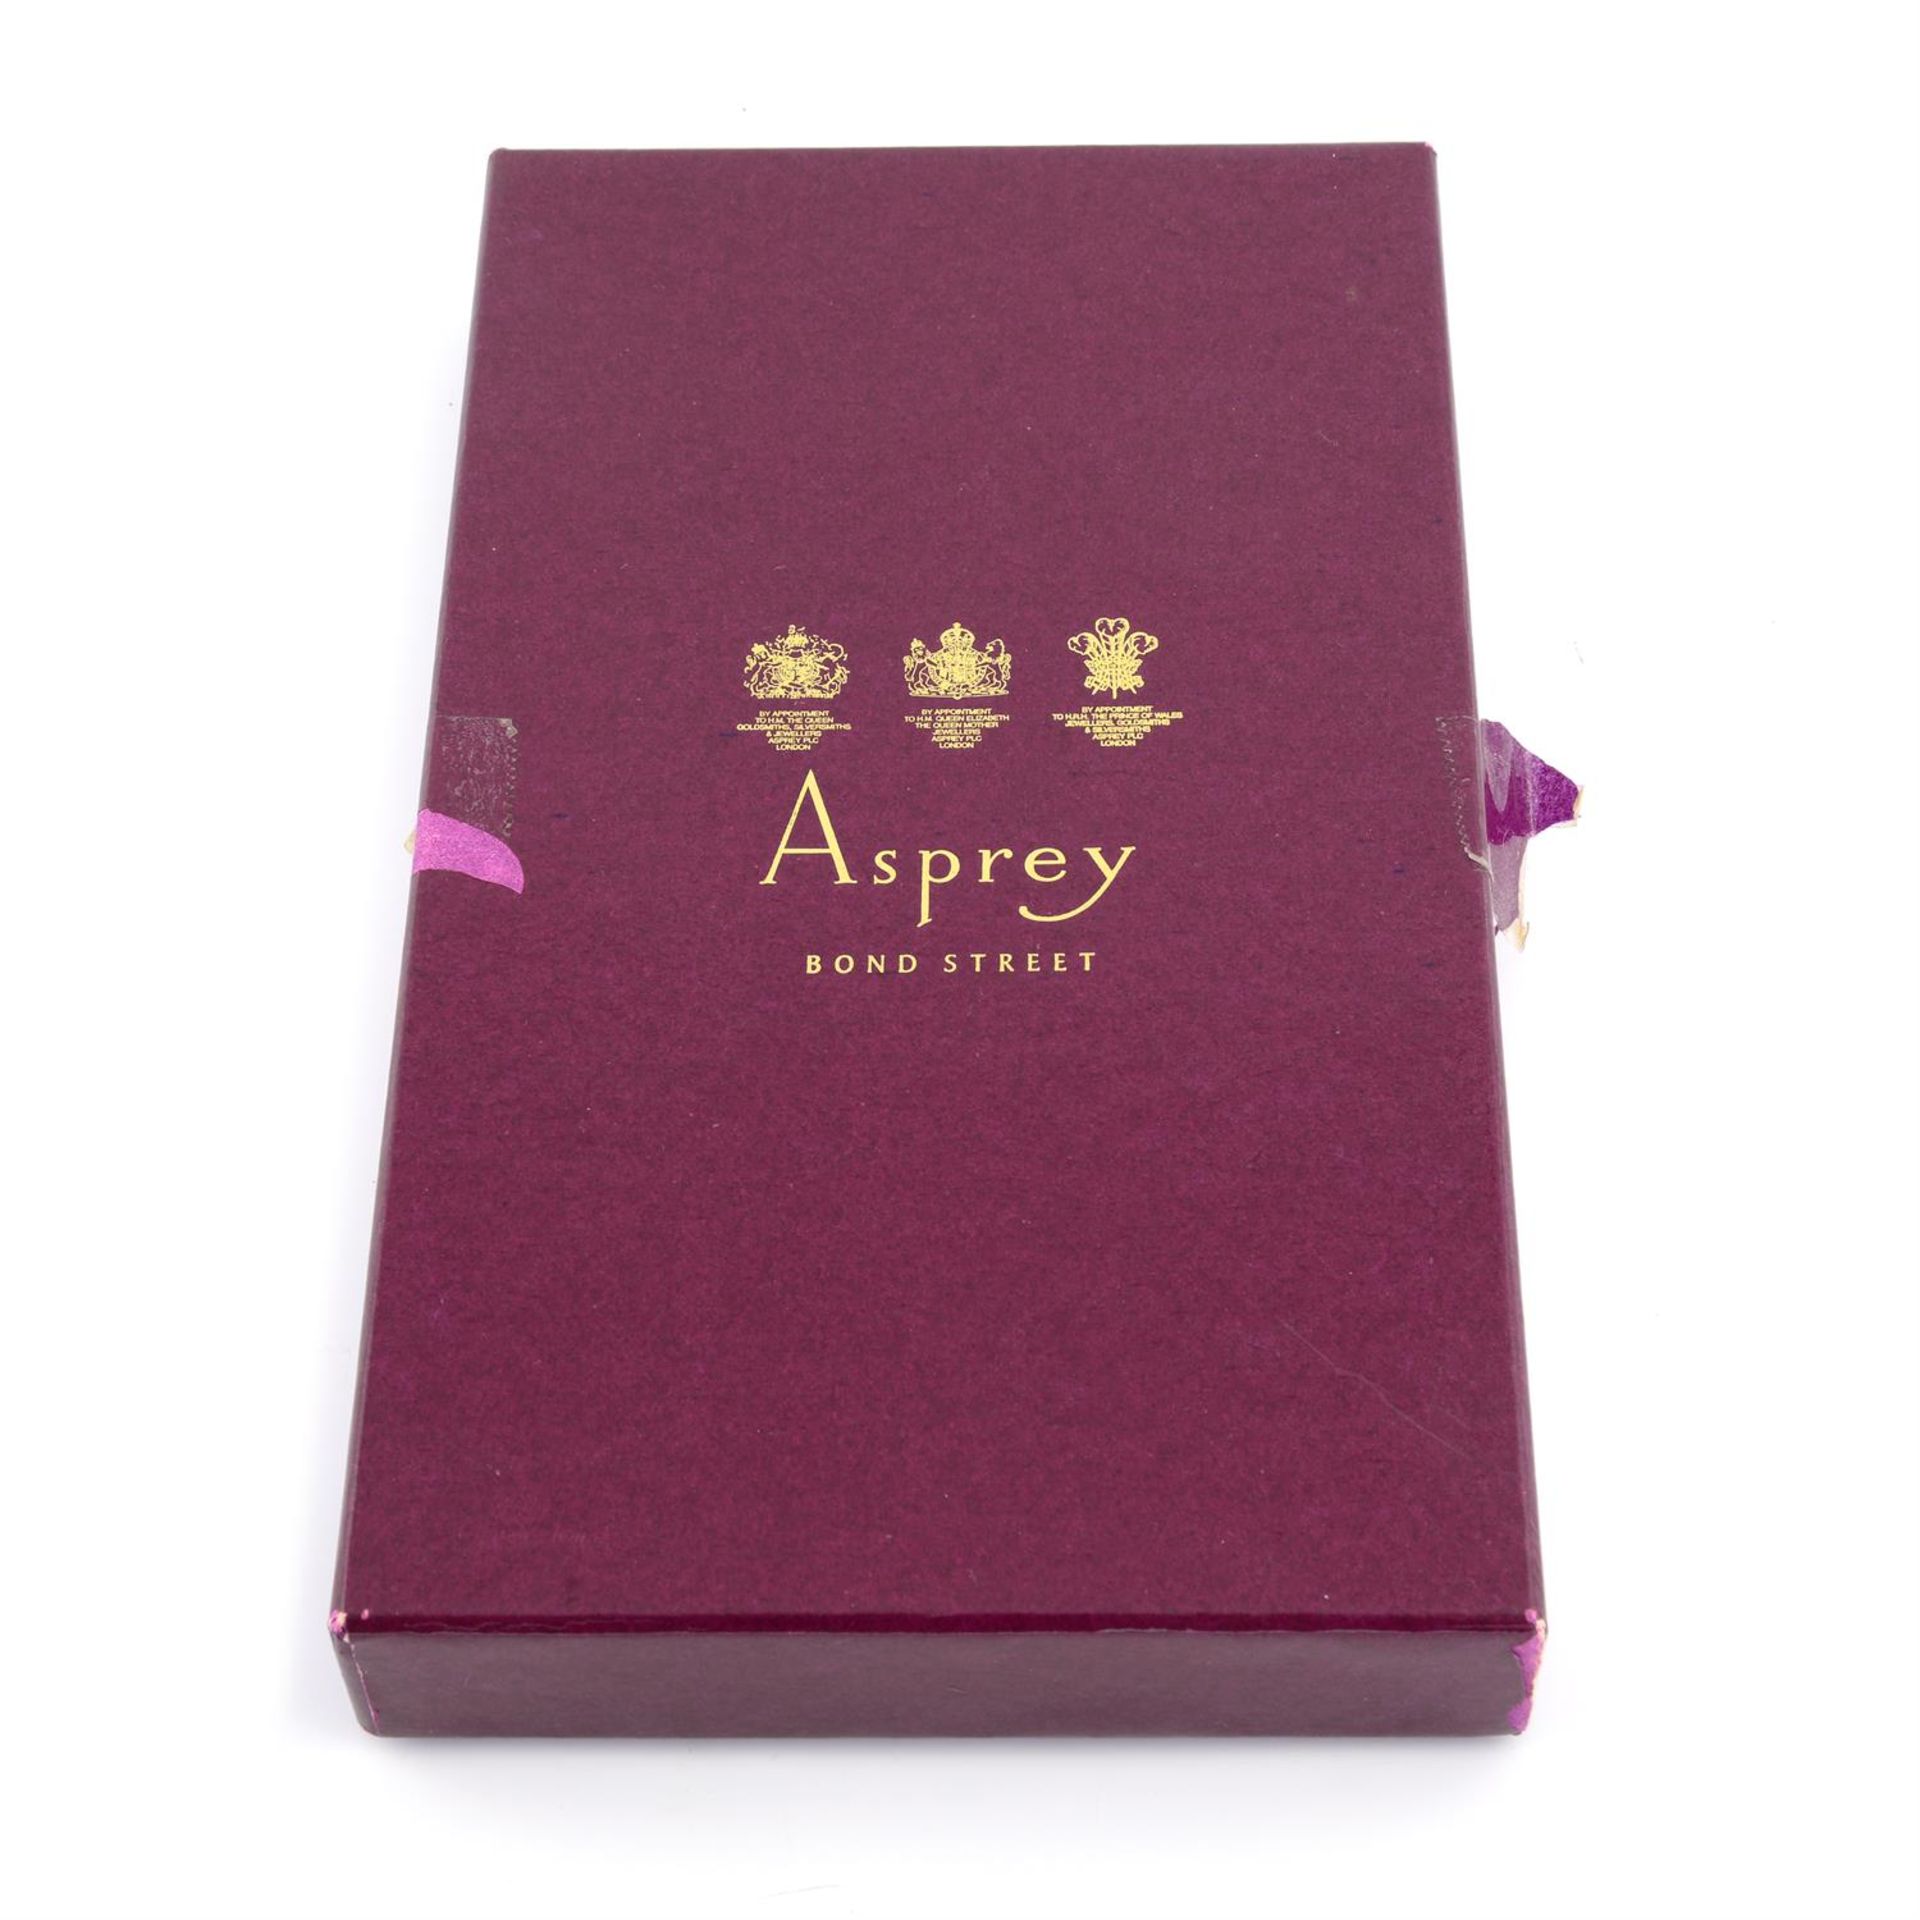 ASPREY - a black patent Crocodile leather wallet with 9ct gold mounted edges. - Image 4 of 4